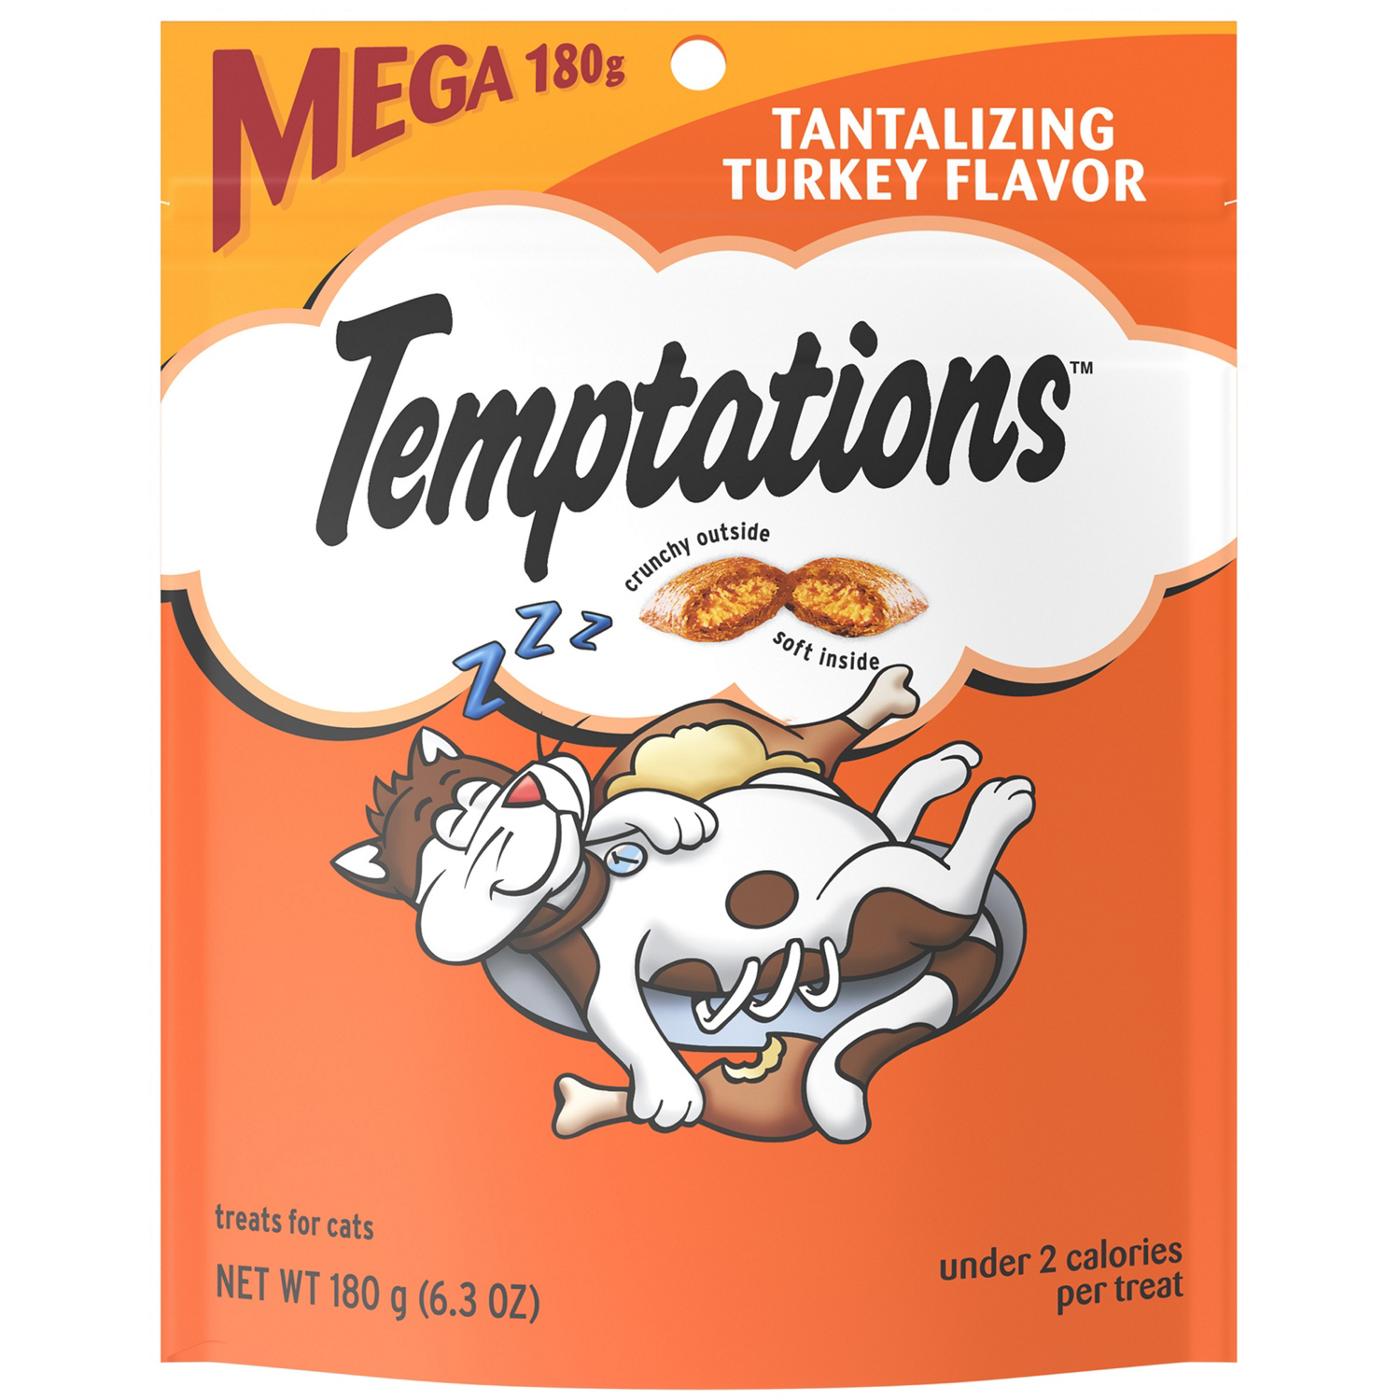 Temptations Classic Crunchy and Soft Cat Treats Tantalizing Turkey Flavor; image 1 of 5